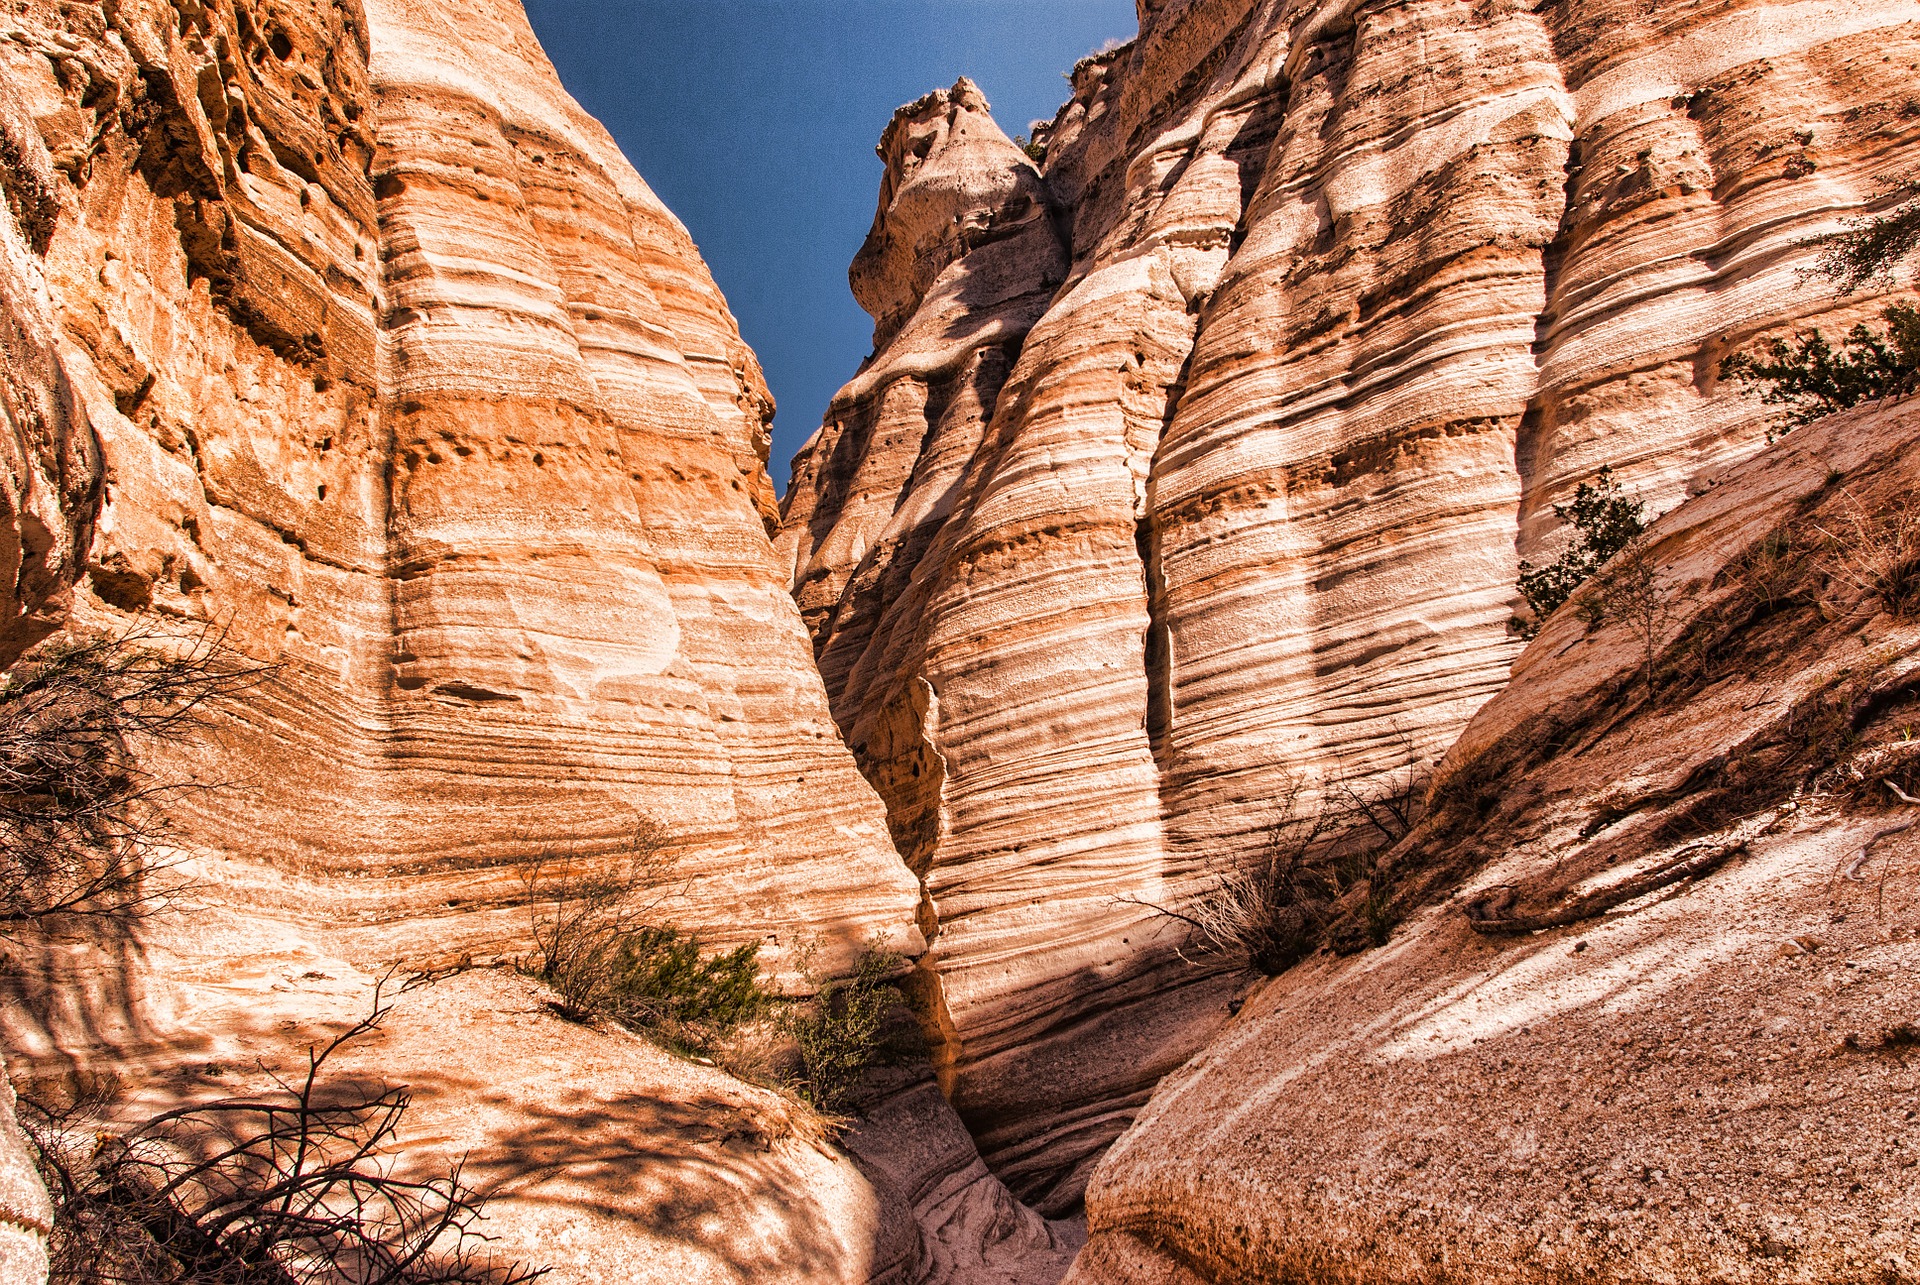 Incredible striated rock formations near Santa Fe, New Mexico.